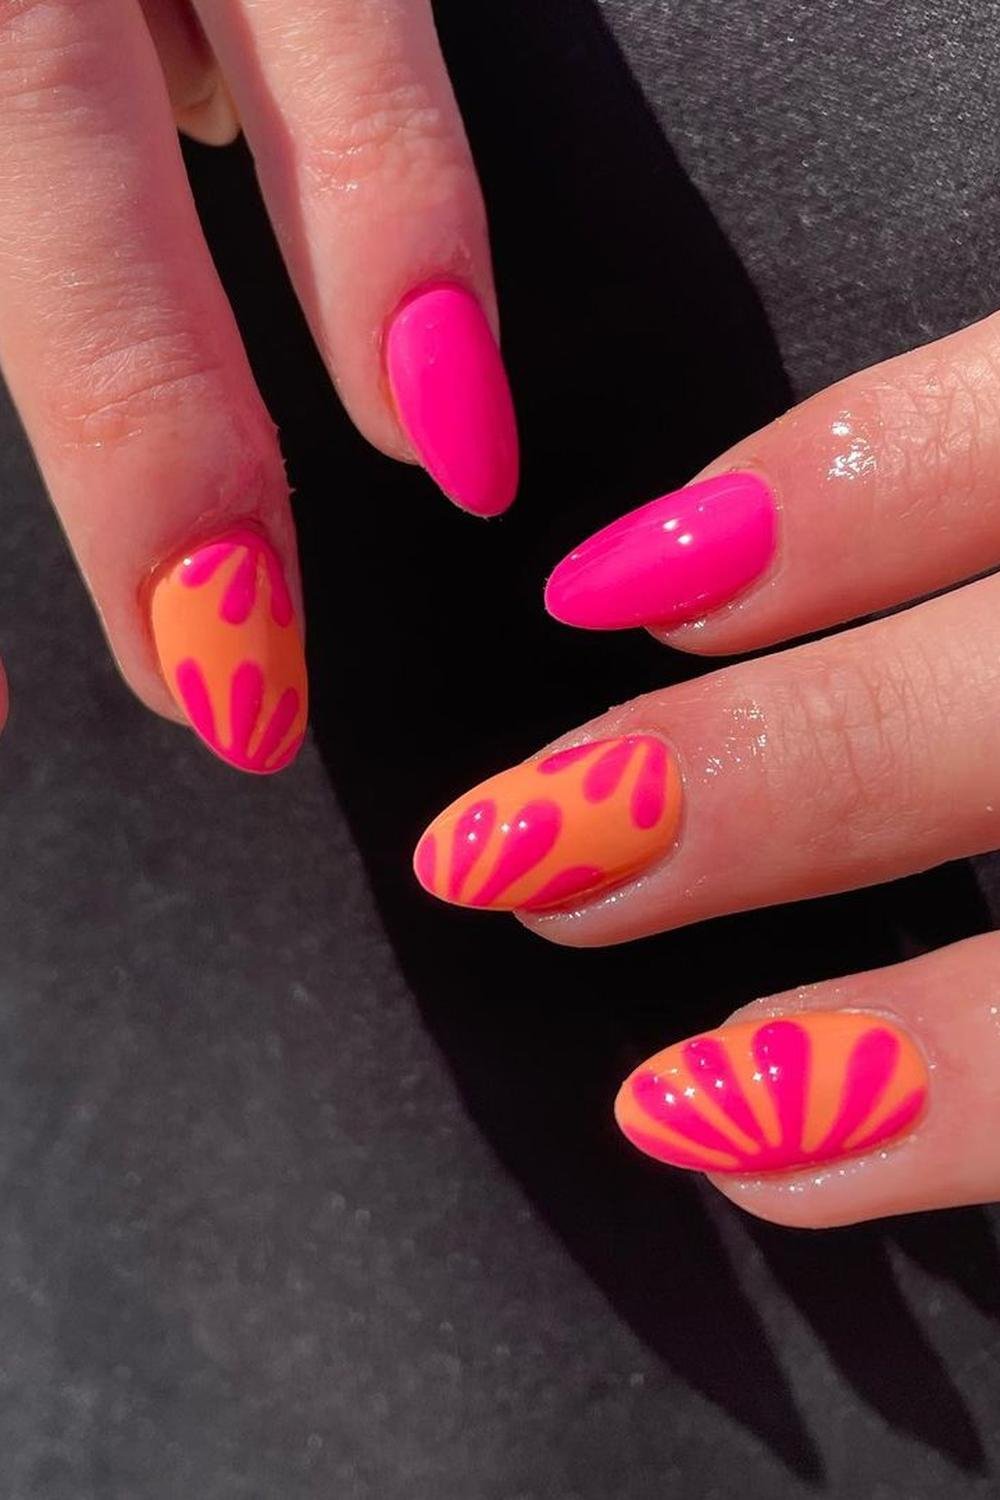 19 - Picture of Pink and Orange Nails